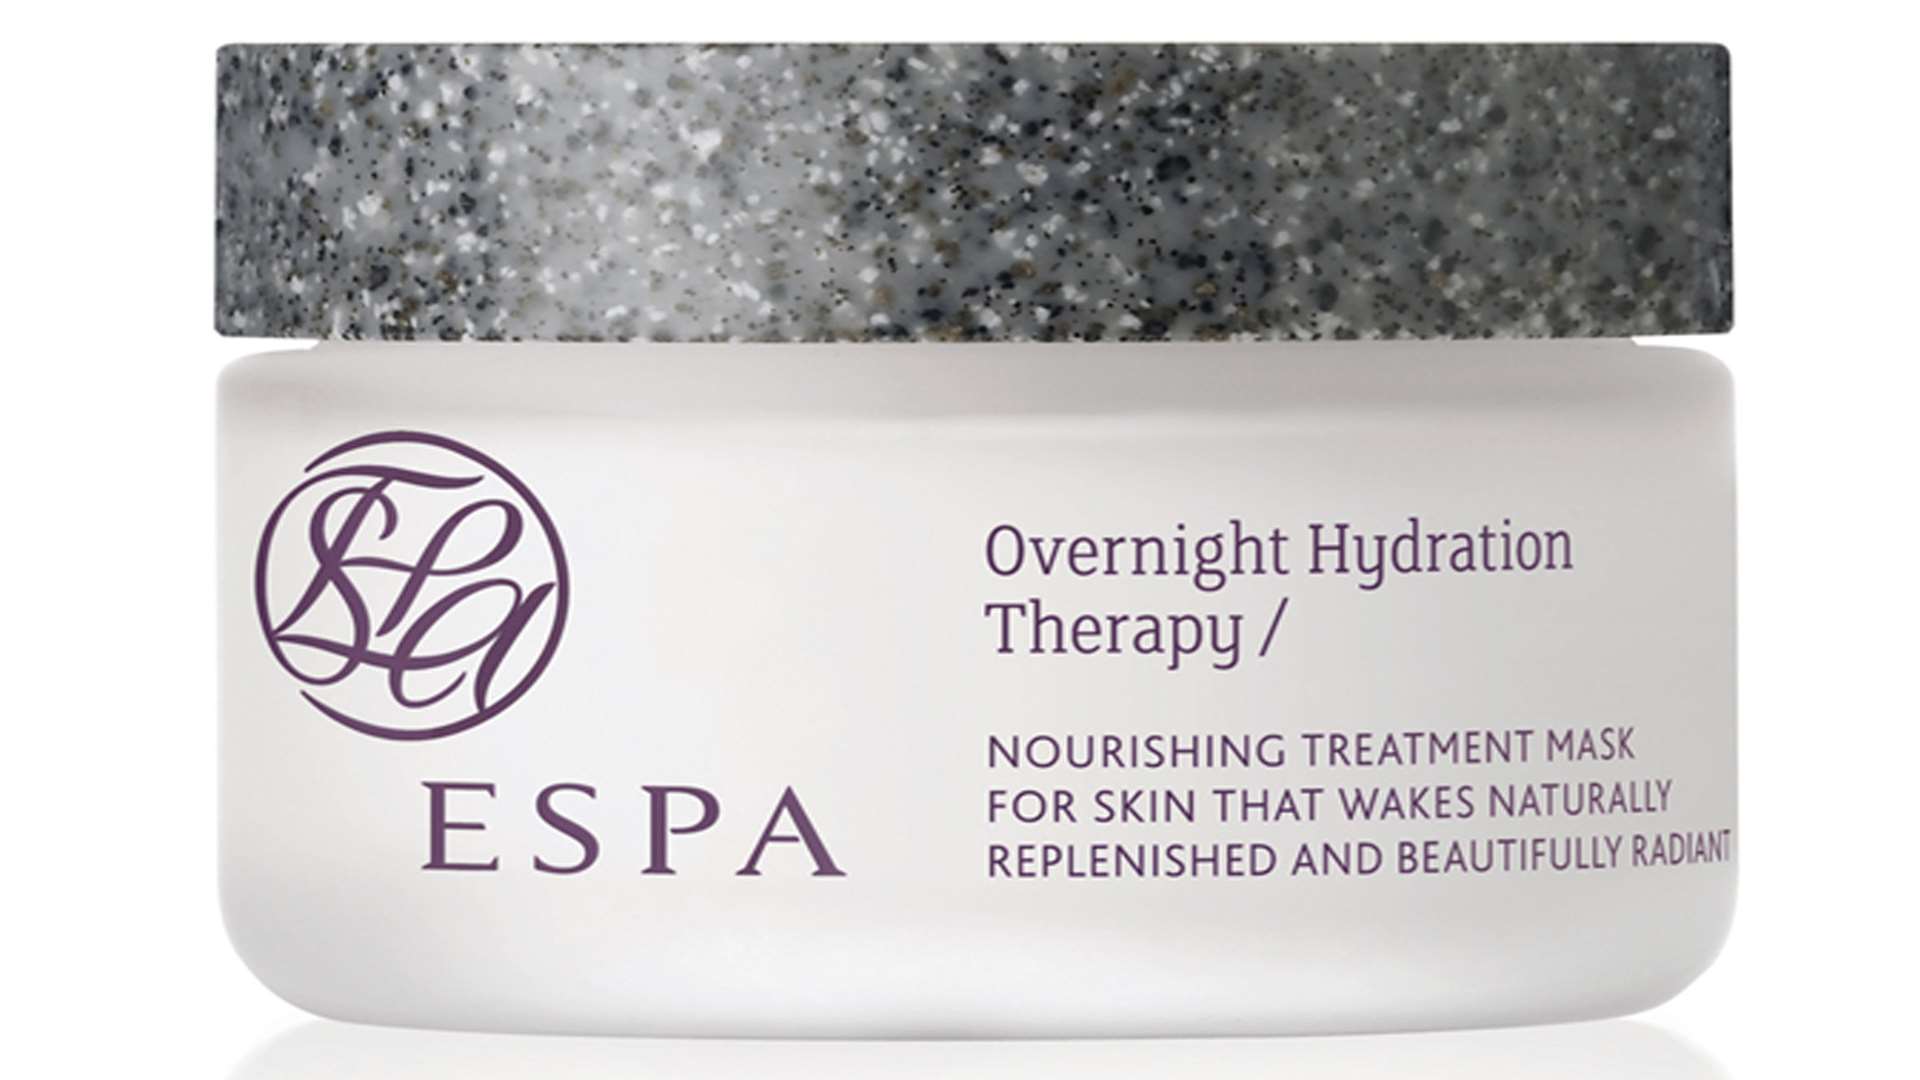 ESPA Overnight Hydration Therapy, available from espaskincare.com